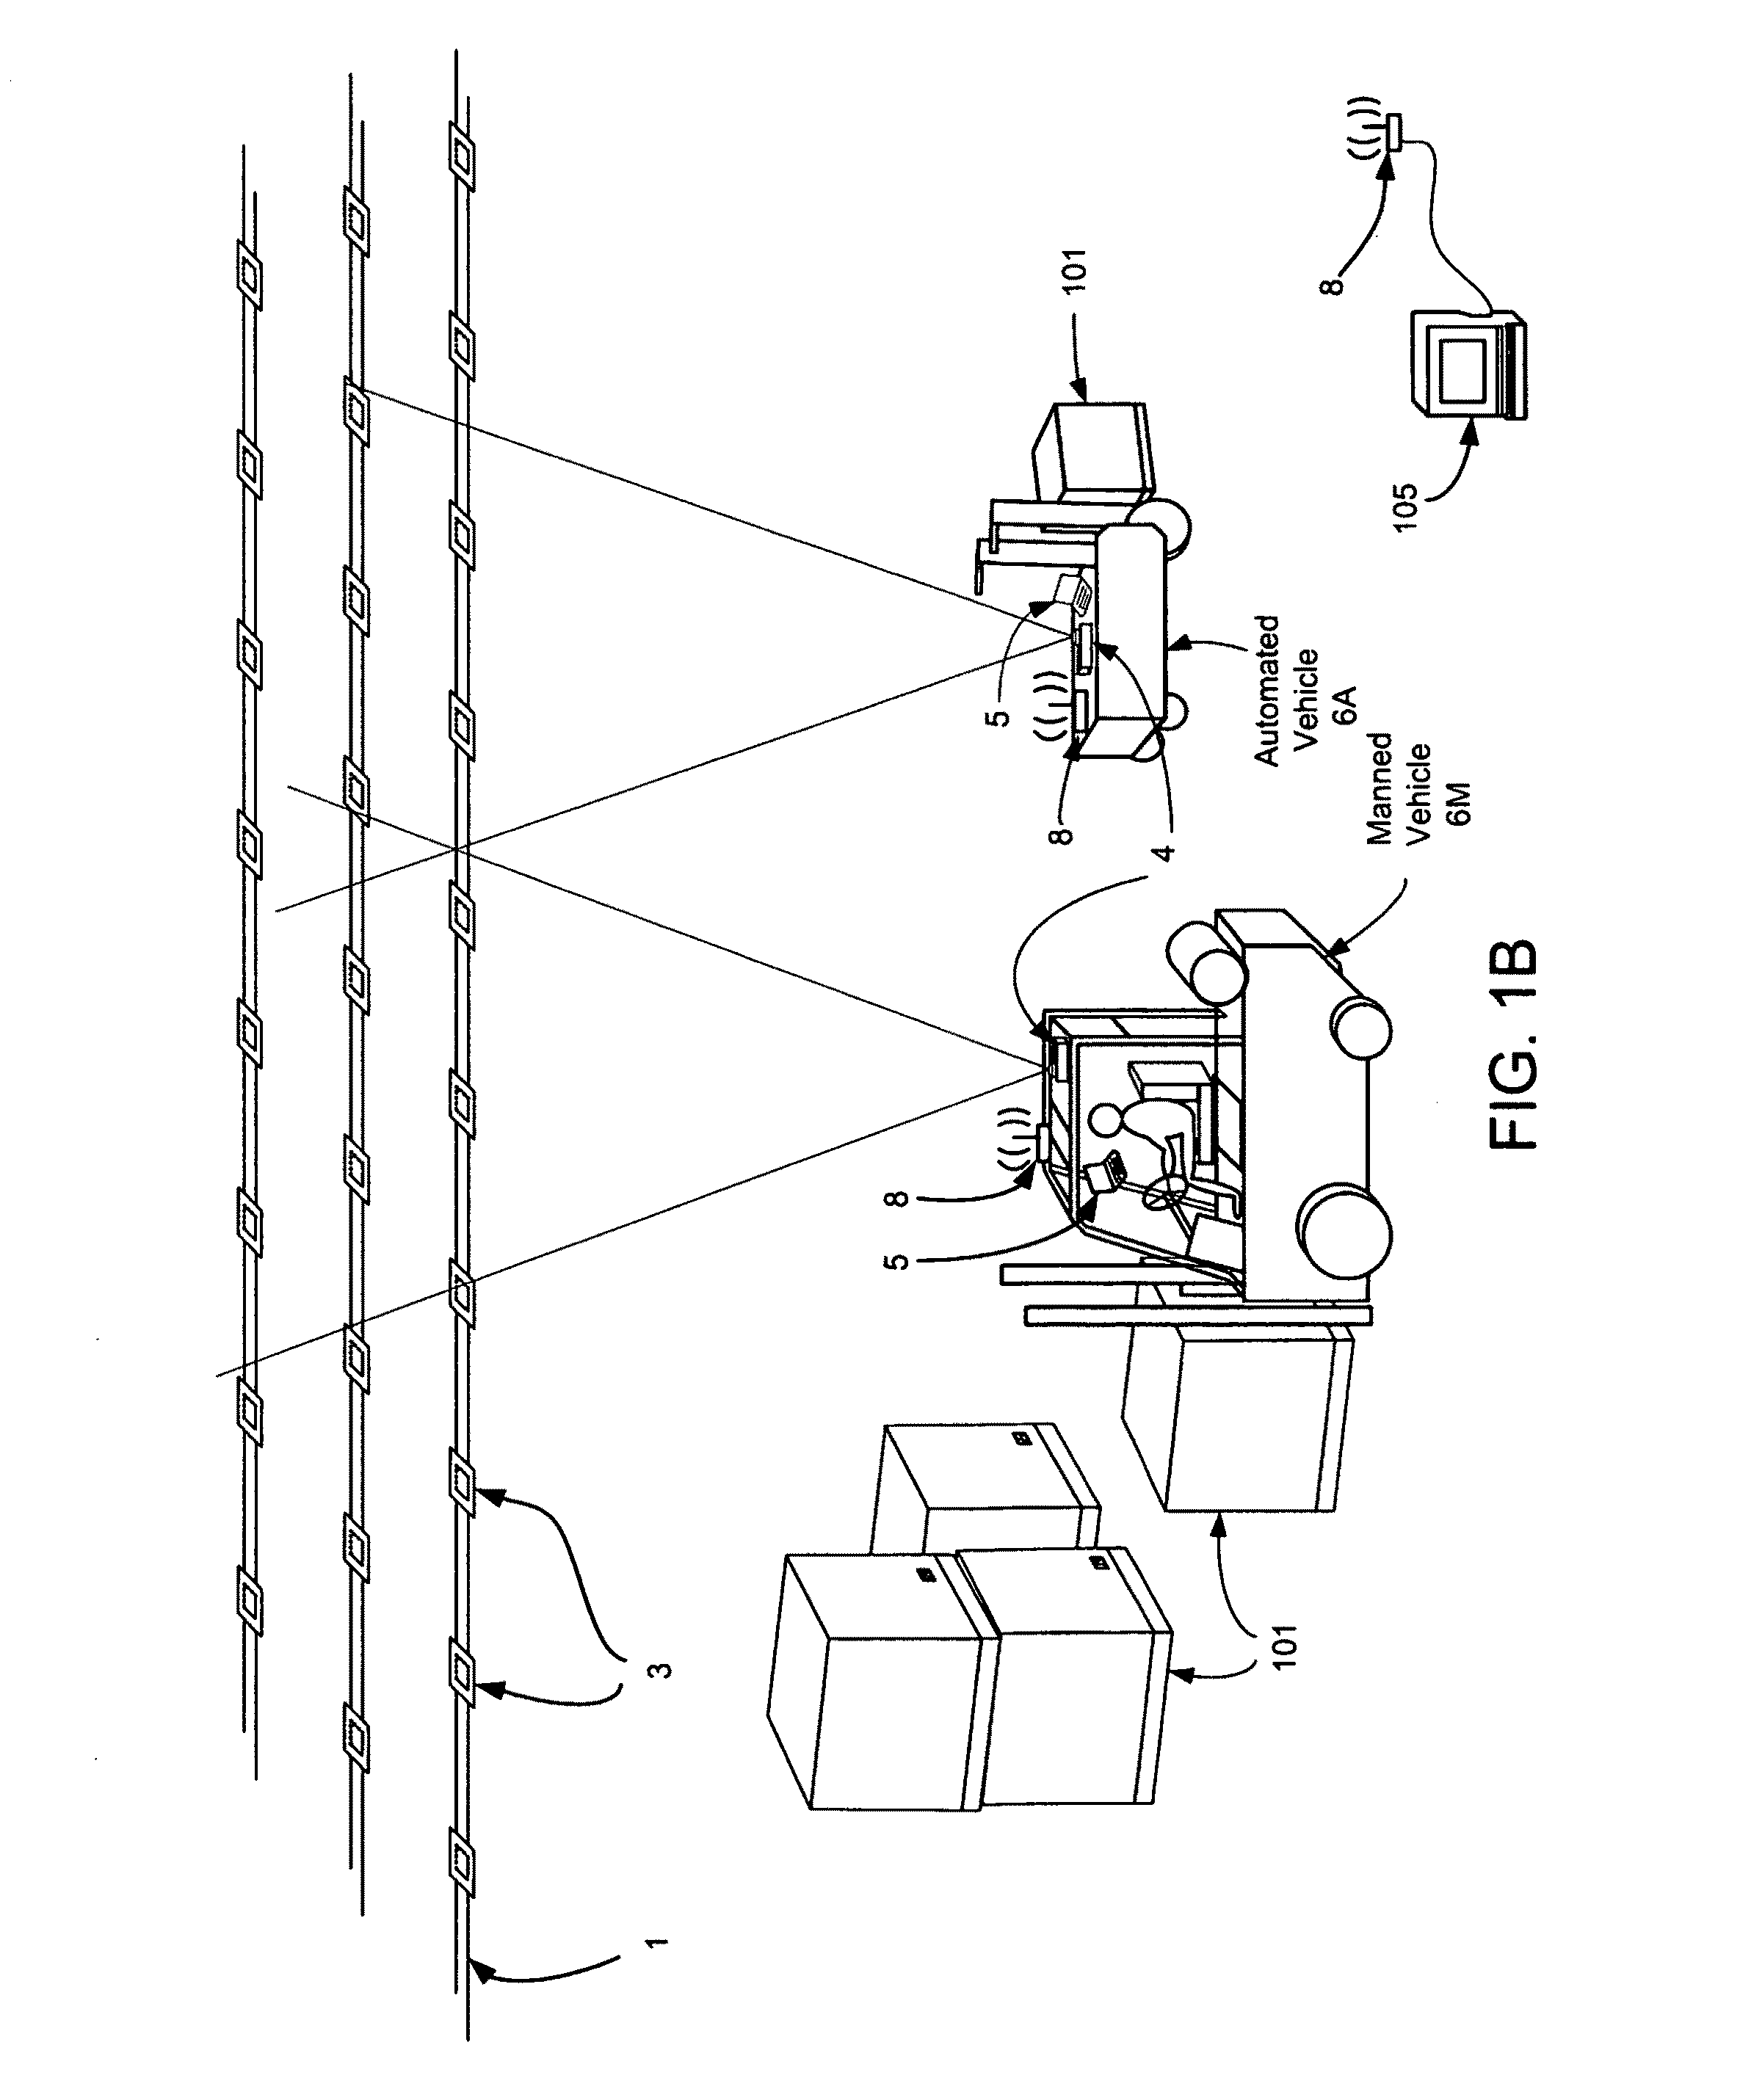 Method and apparatus for managing and controlling manned and automated utility vehicles